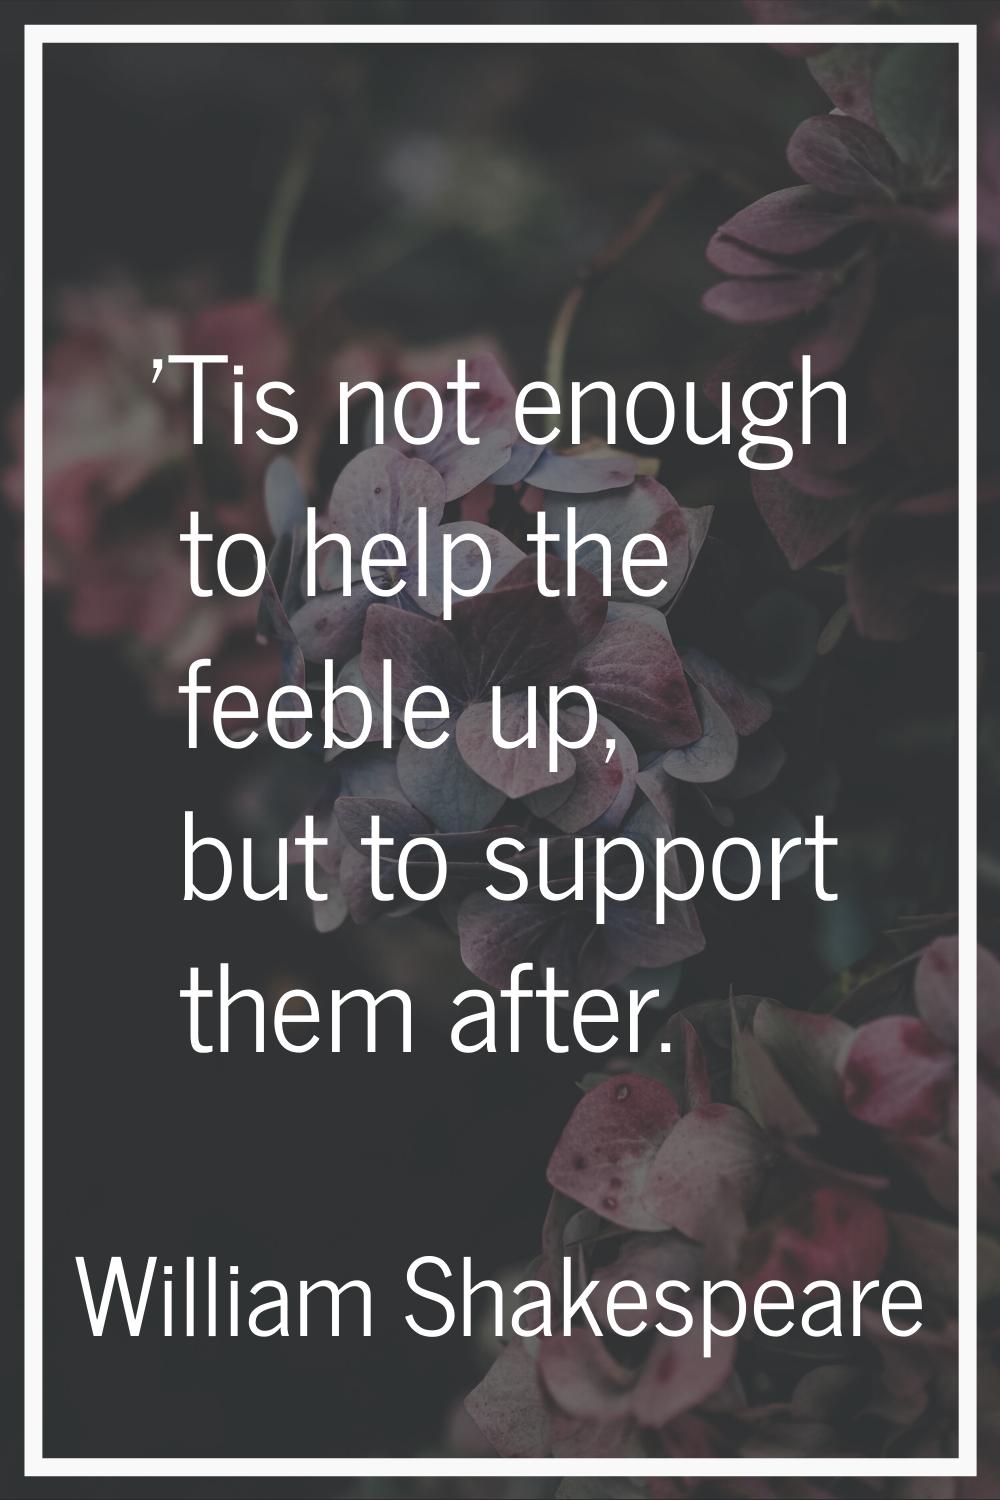 'Tis not enough to help the feeble up, but to support them after.